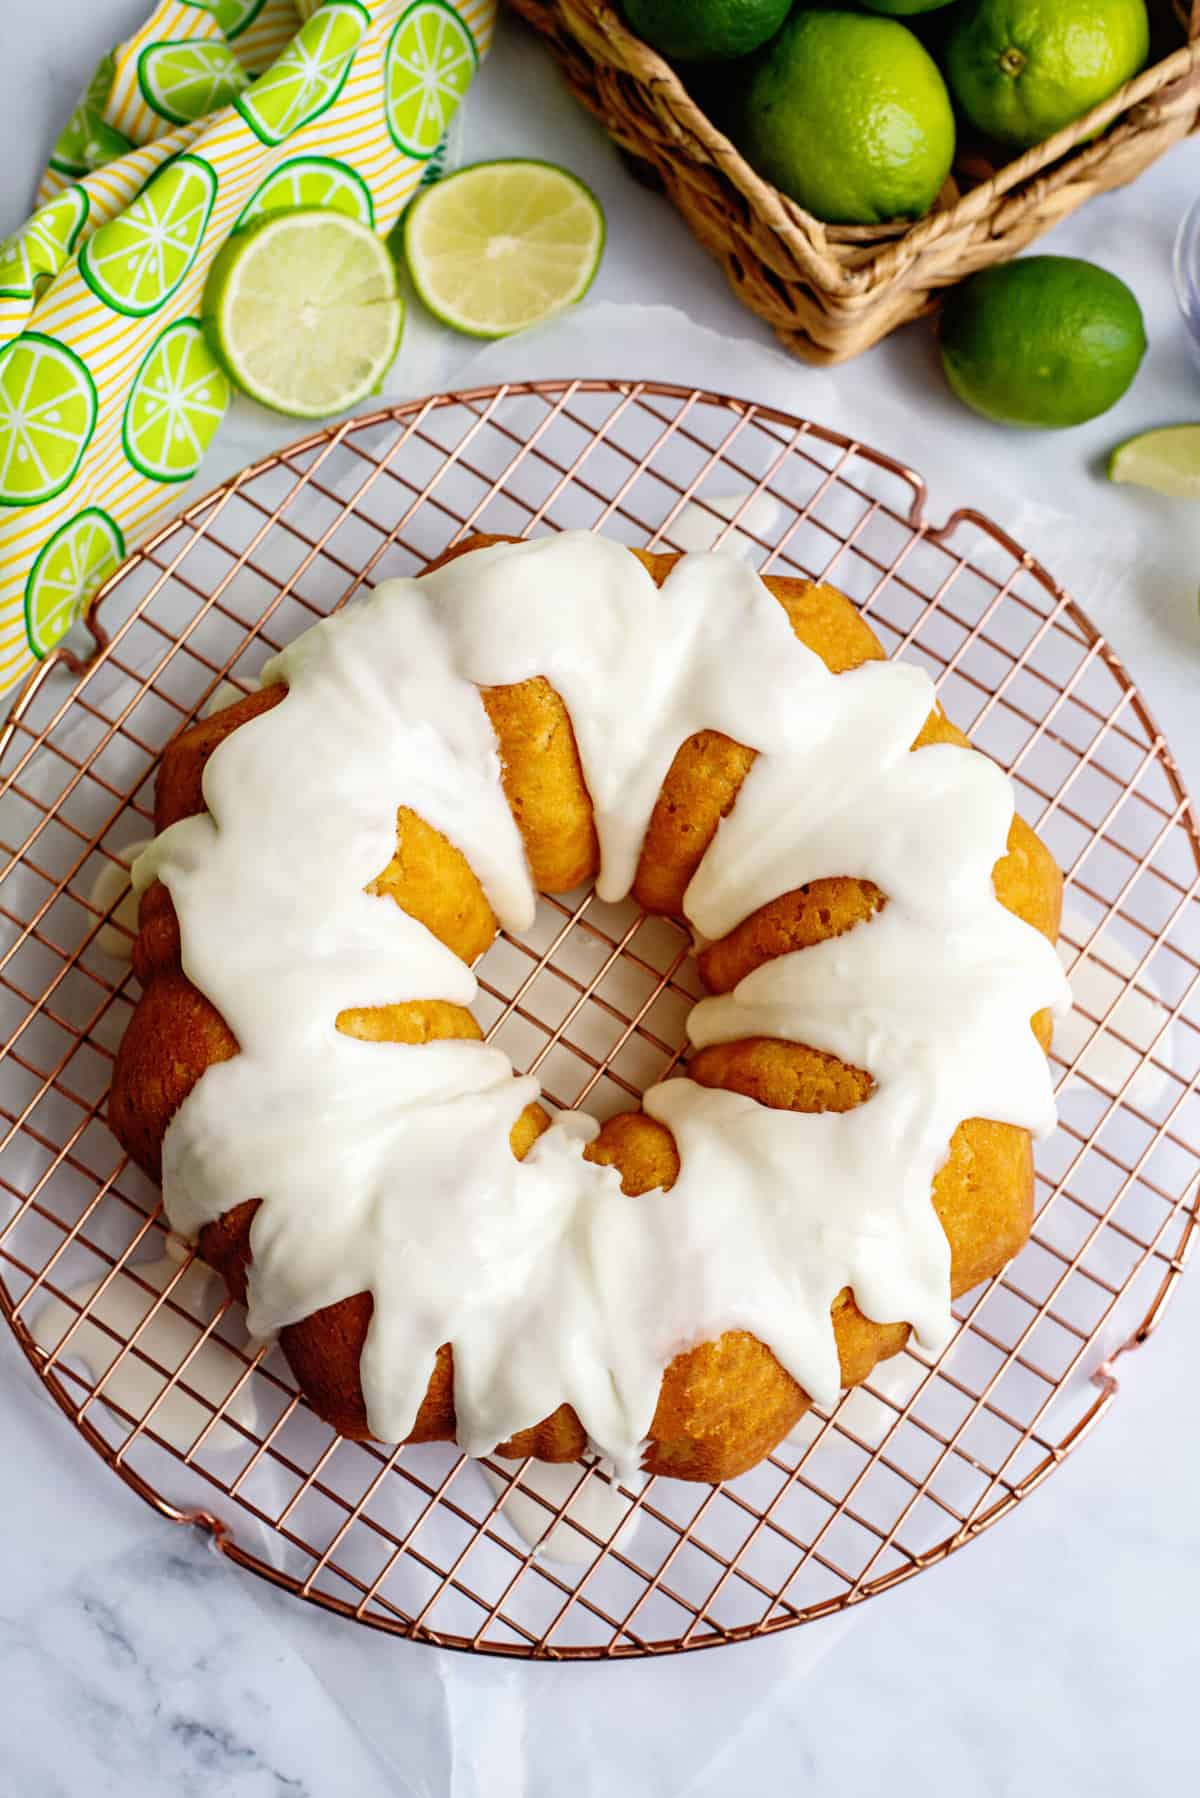 Pour the glaze over the buttermilk lime pound cake